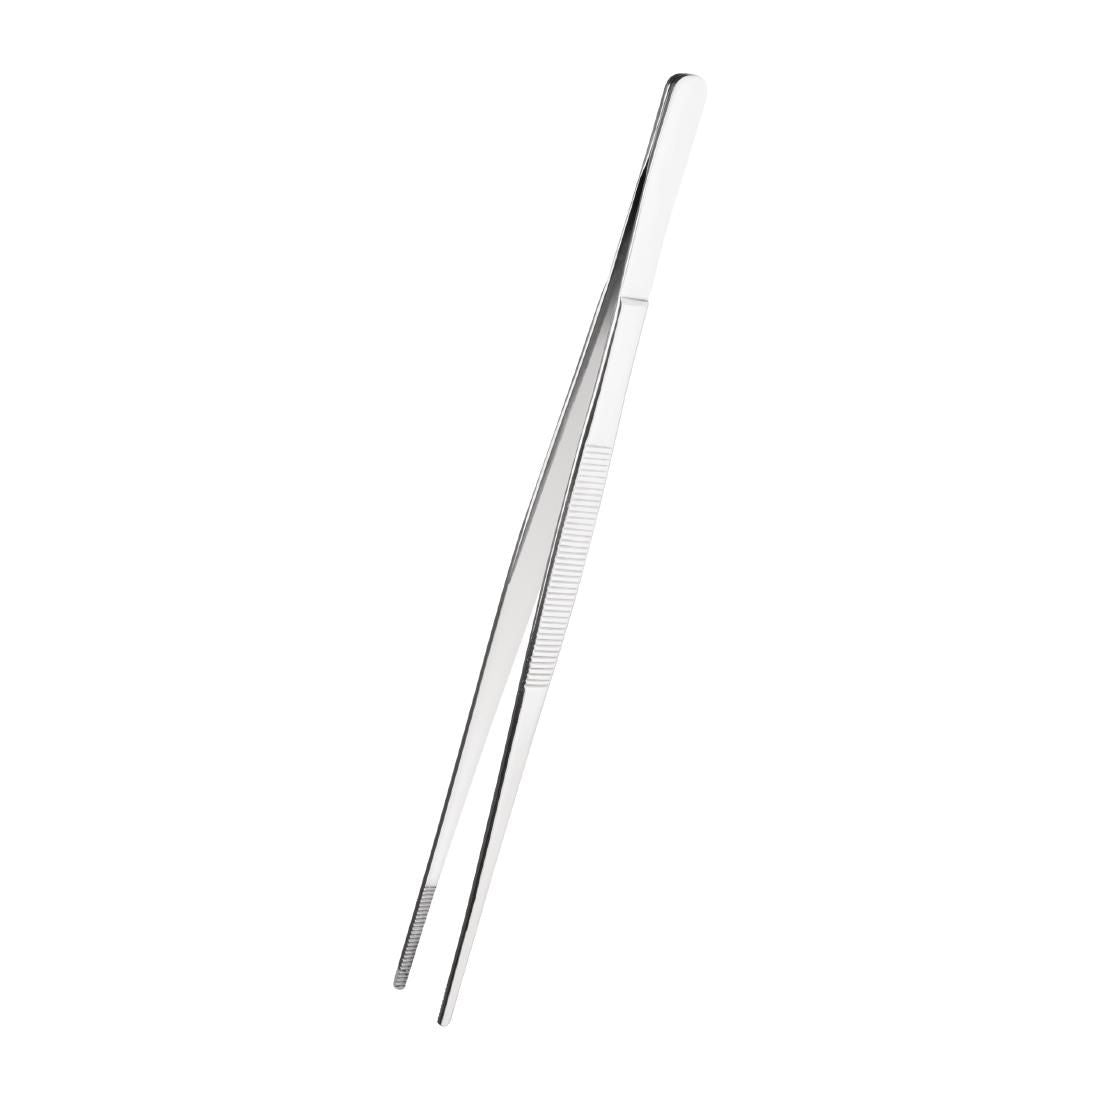 CW498 Vogue Round Tipped Tweezers 300mm JD Catering Equipment Solutions Ltd